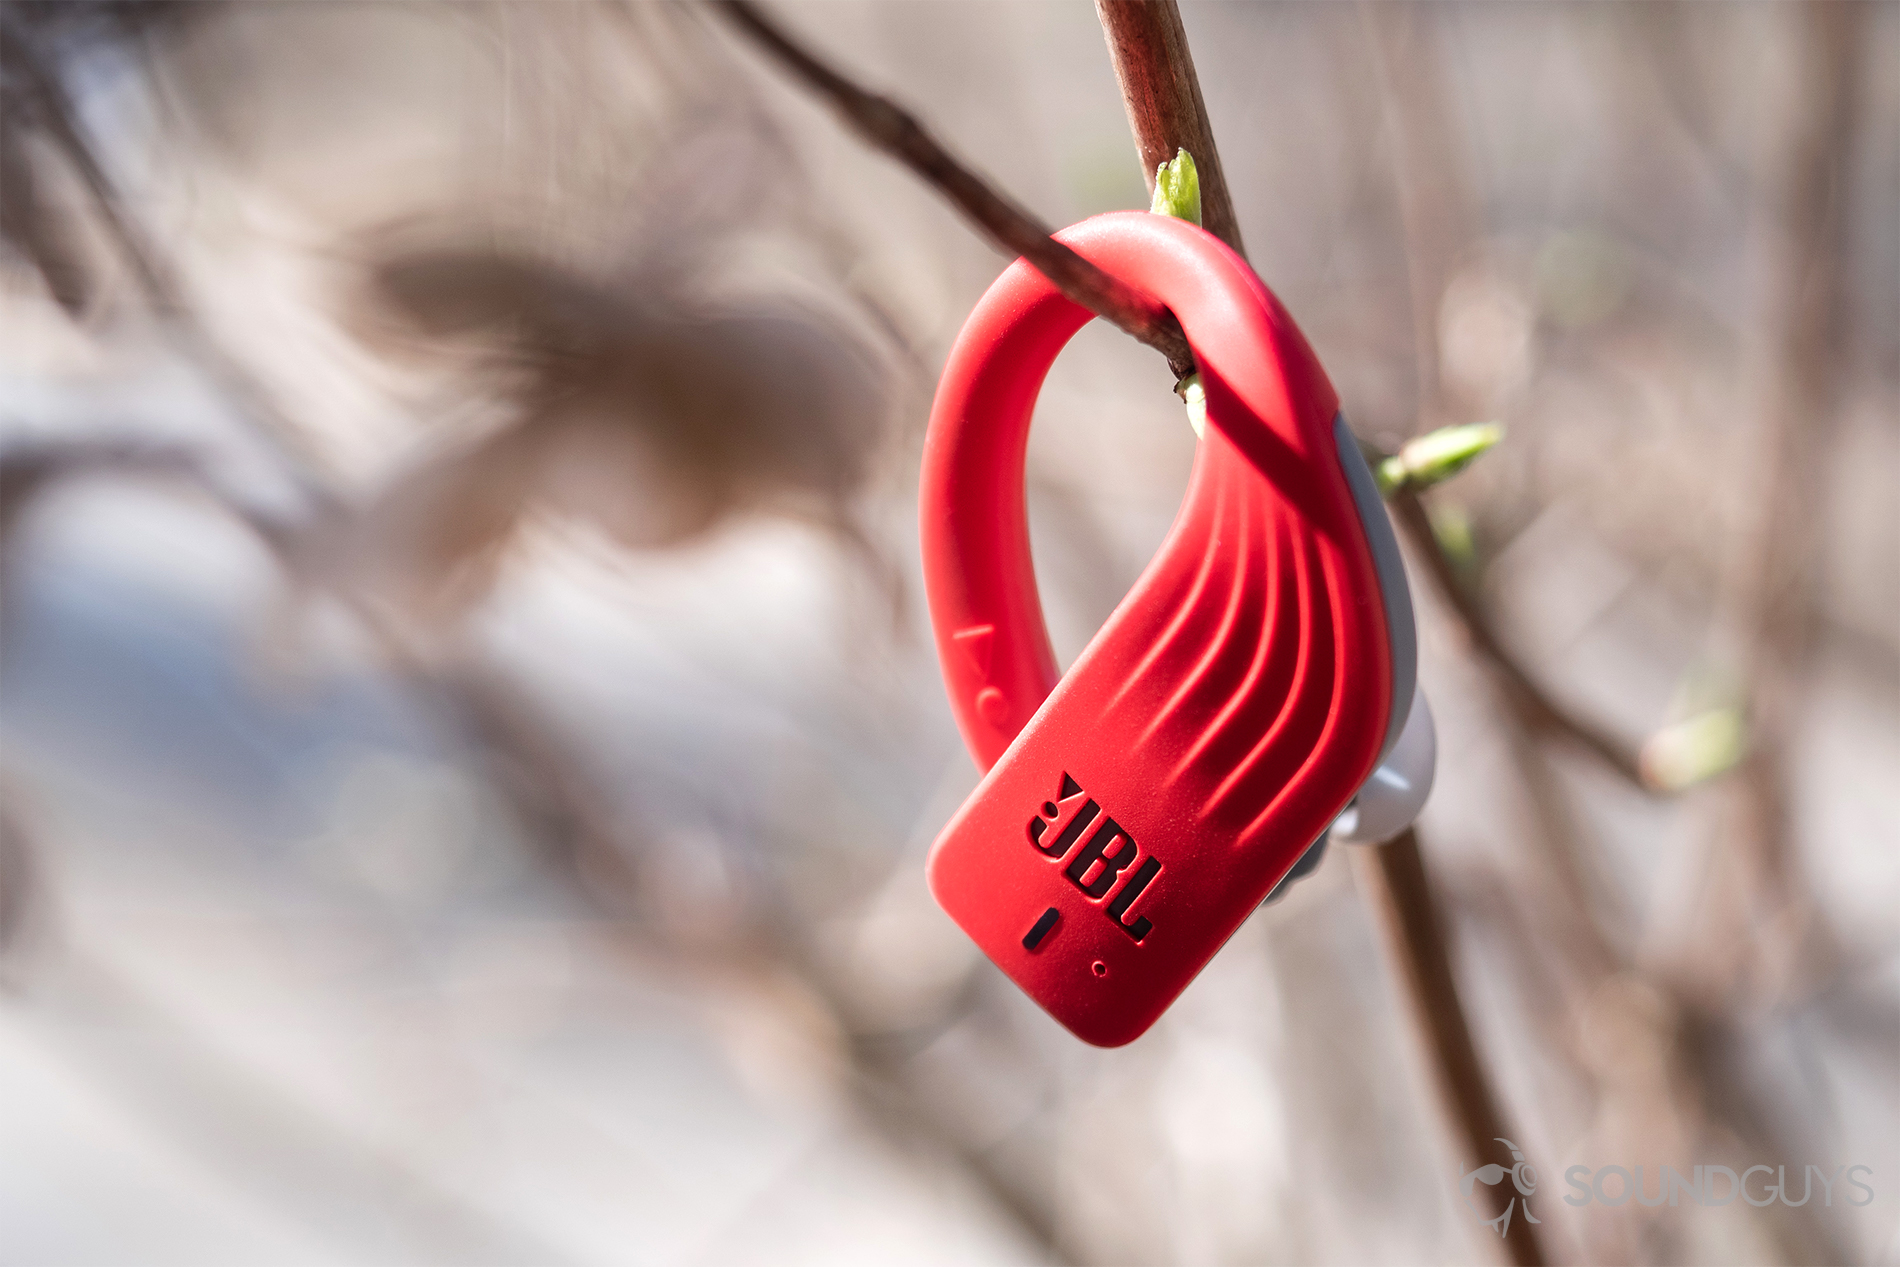 JBL Endurance Dive: Focus image of the Endurance Peak's right earbud dangling from branches.